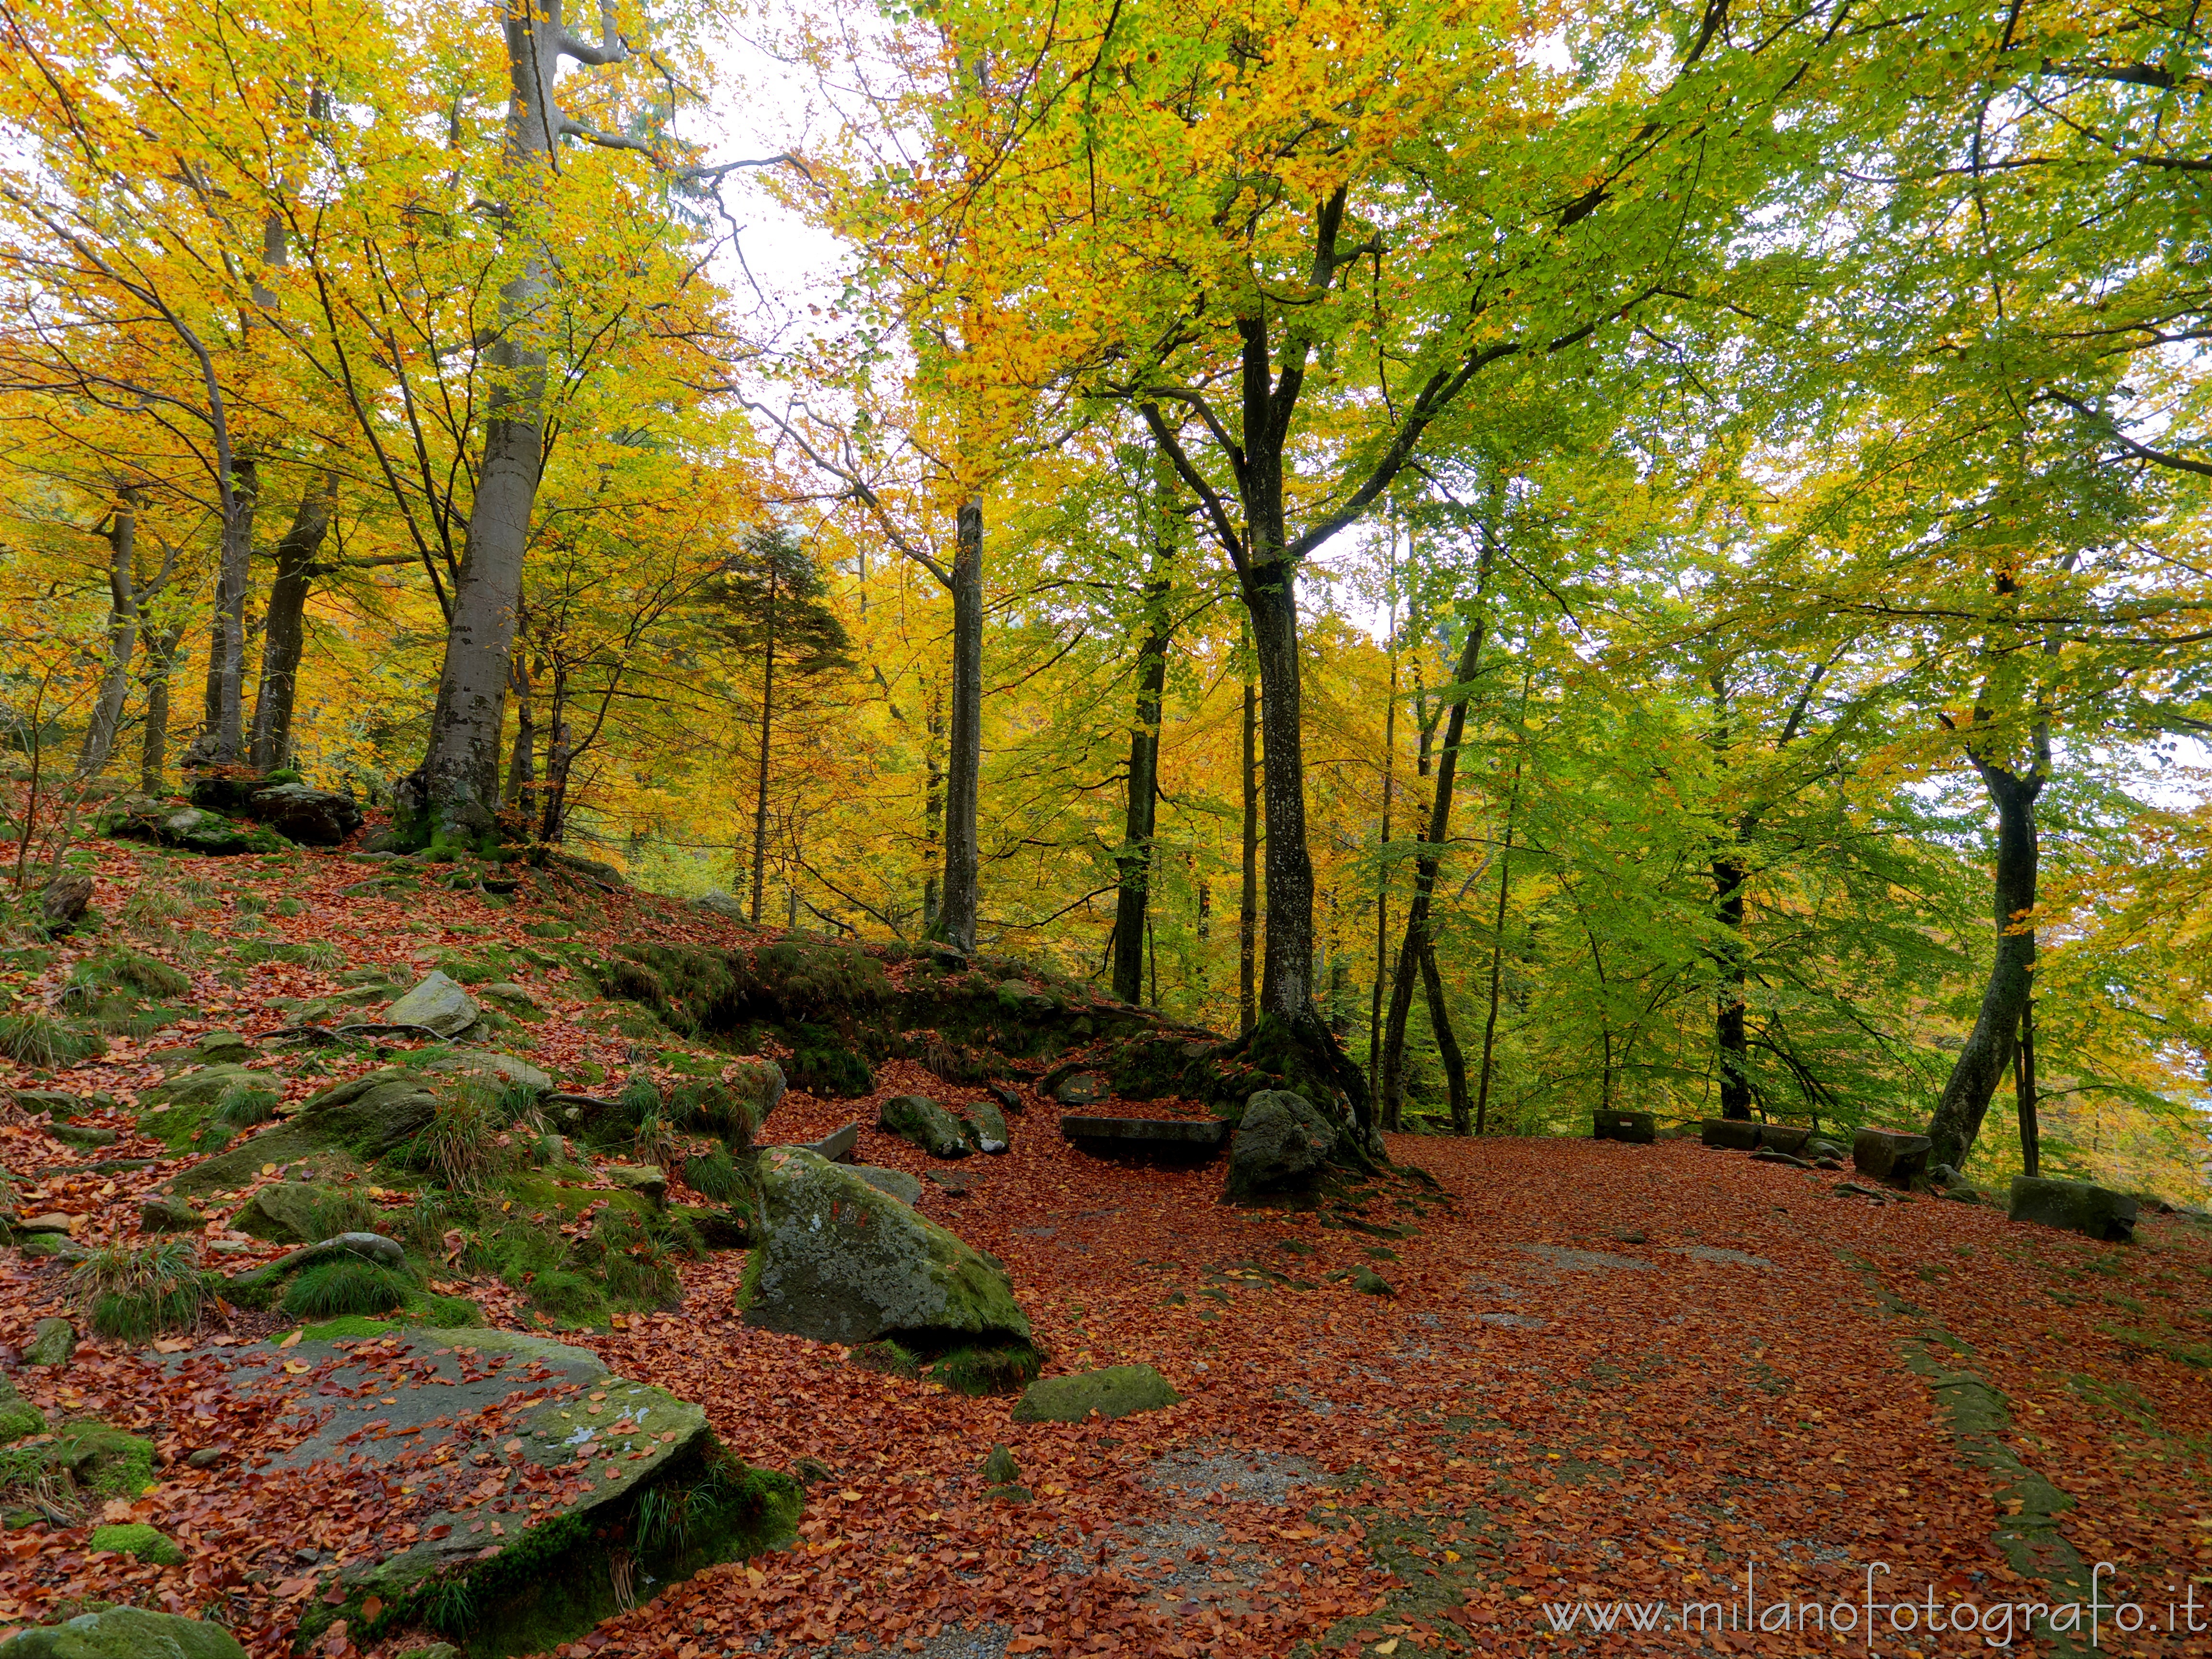 Biella, Italy: Autumn colors in the "walk of the priests" behind the Sanctuary of Oropa - Biella, Italy